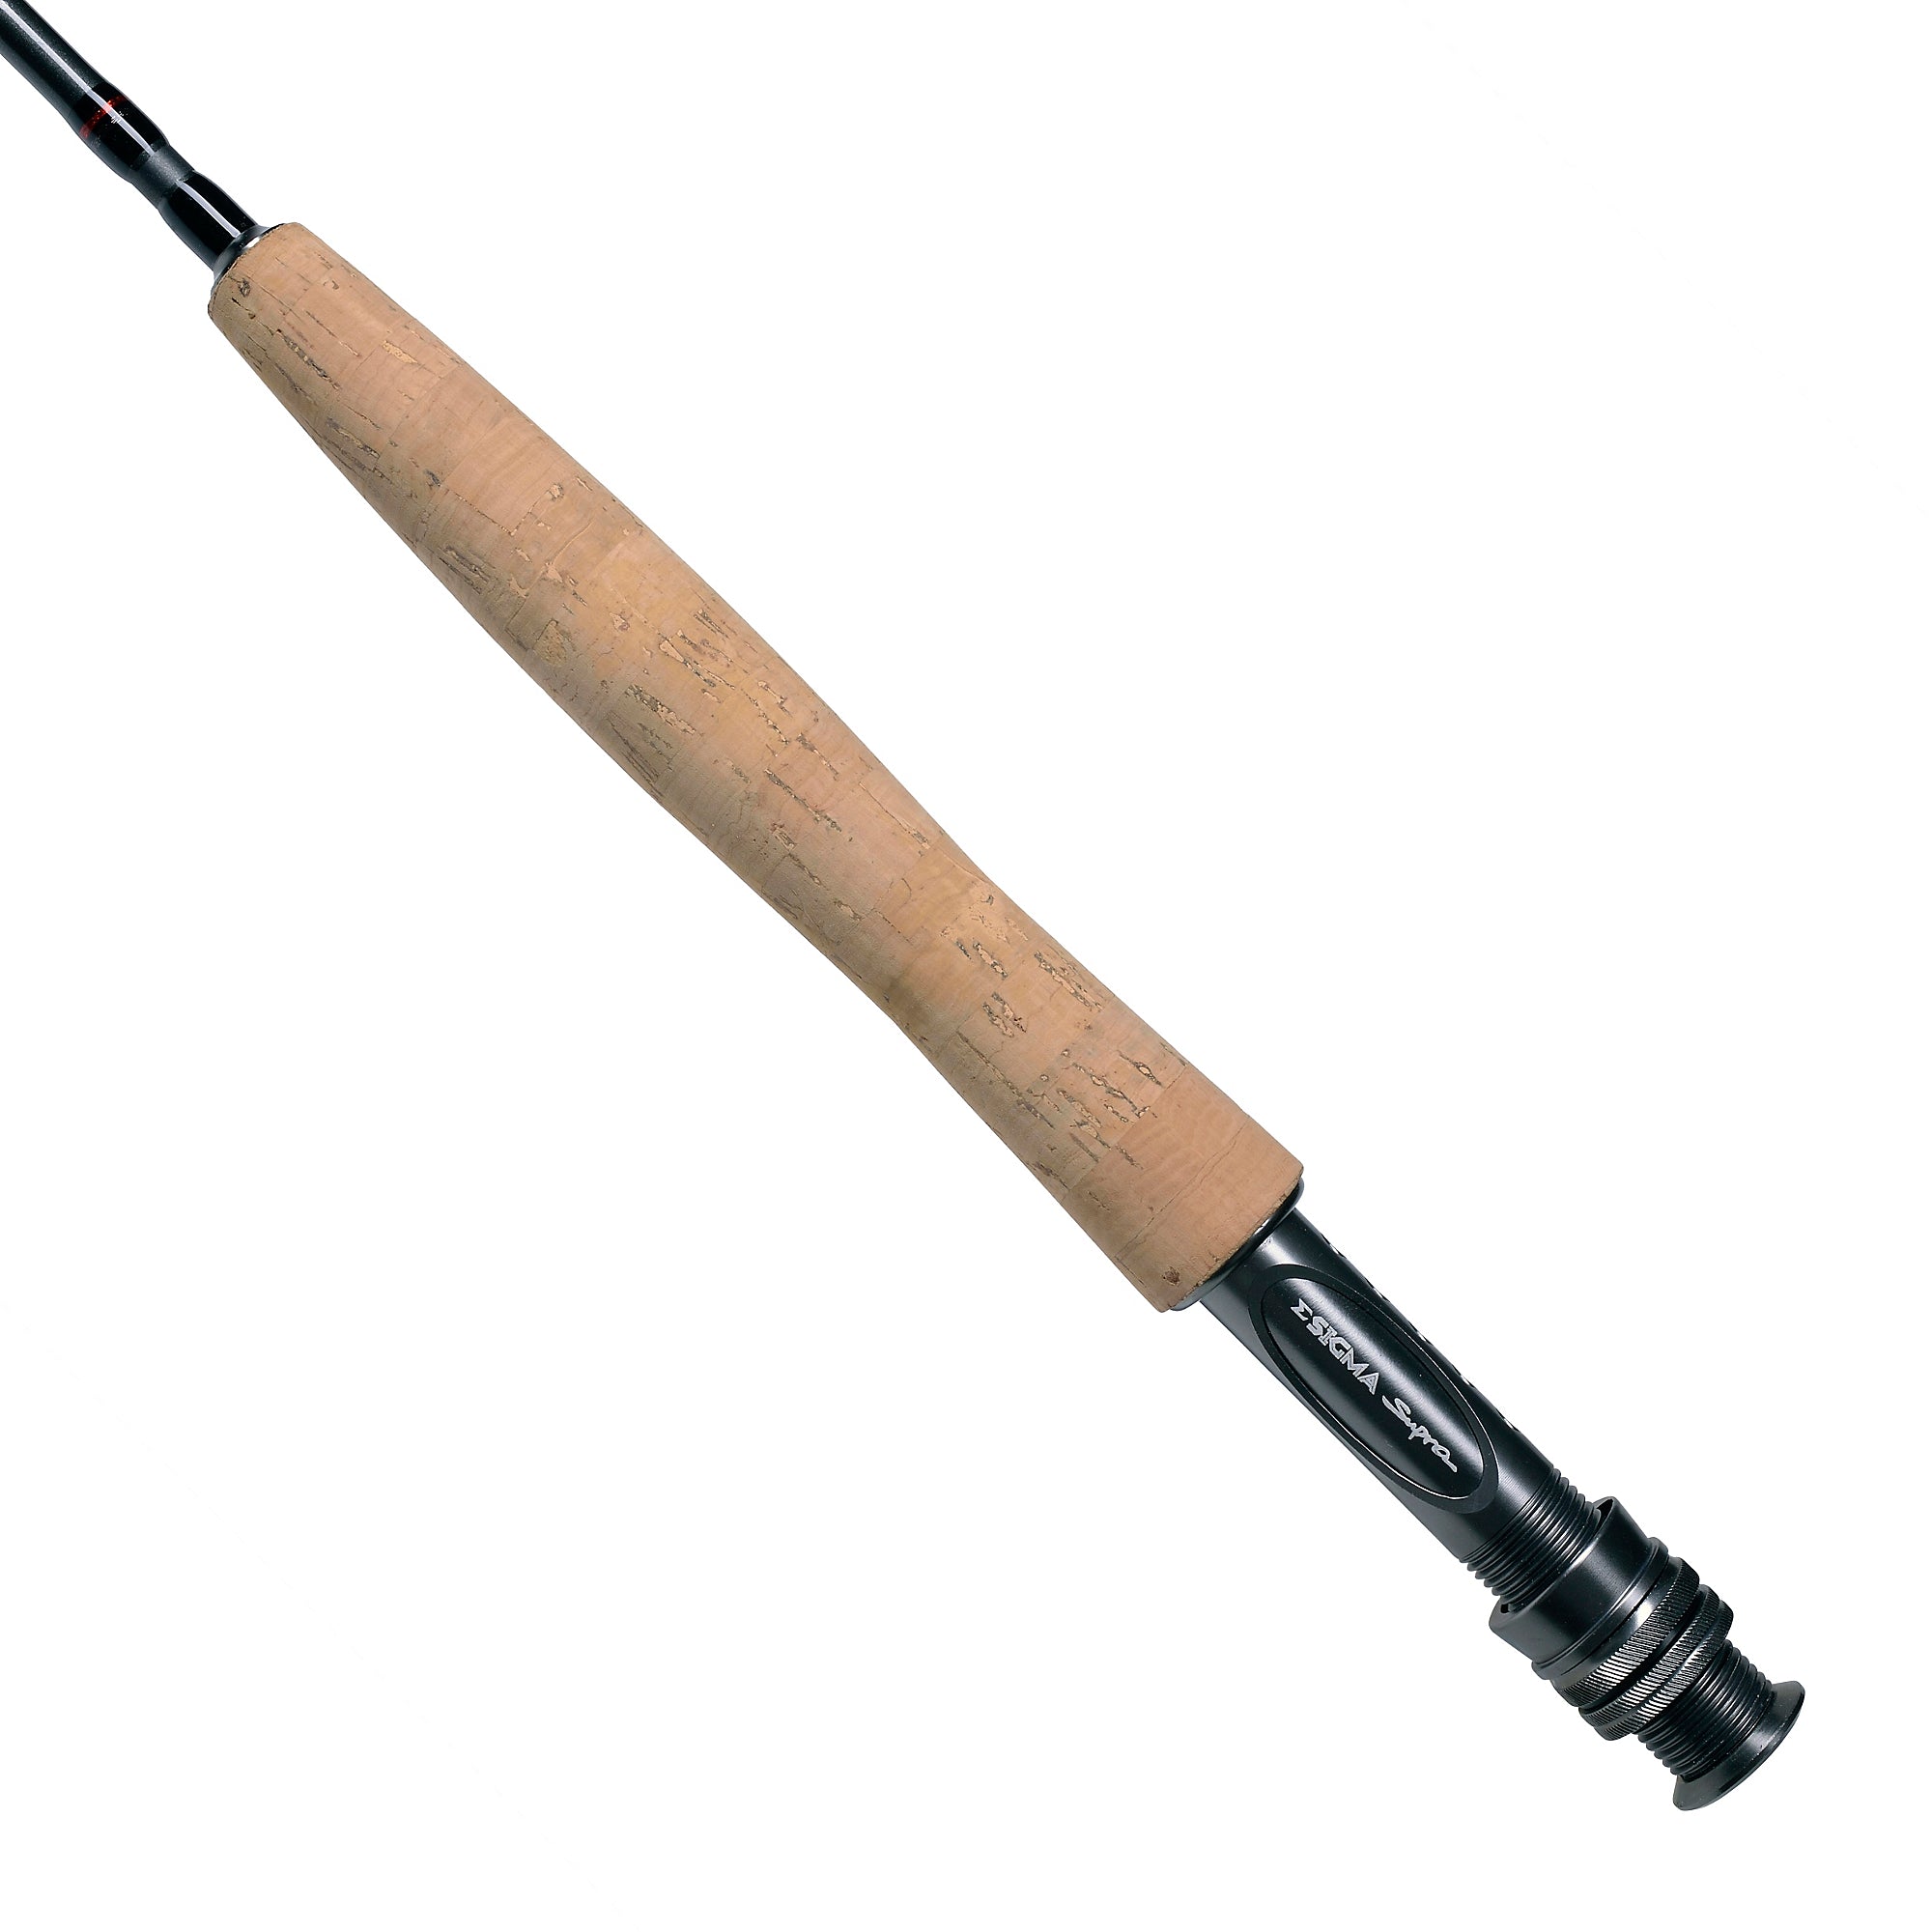 Shakespeare Sigma 5Wt Fly Rod and Reel Combo 9ft